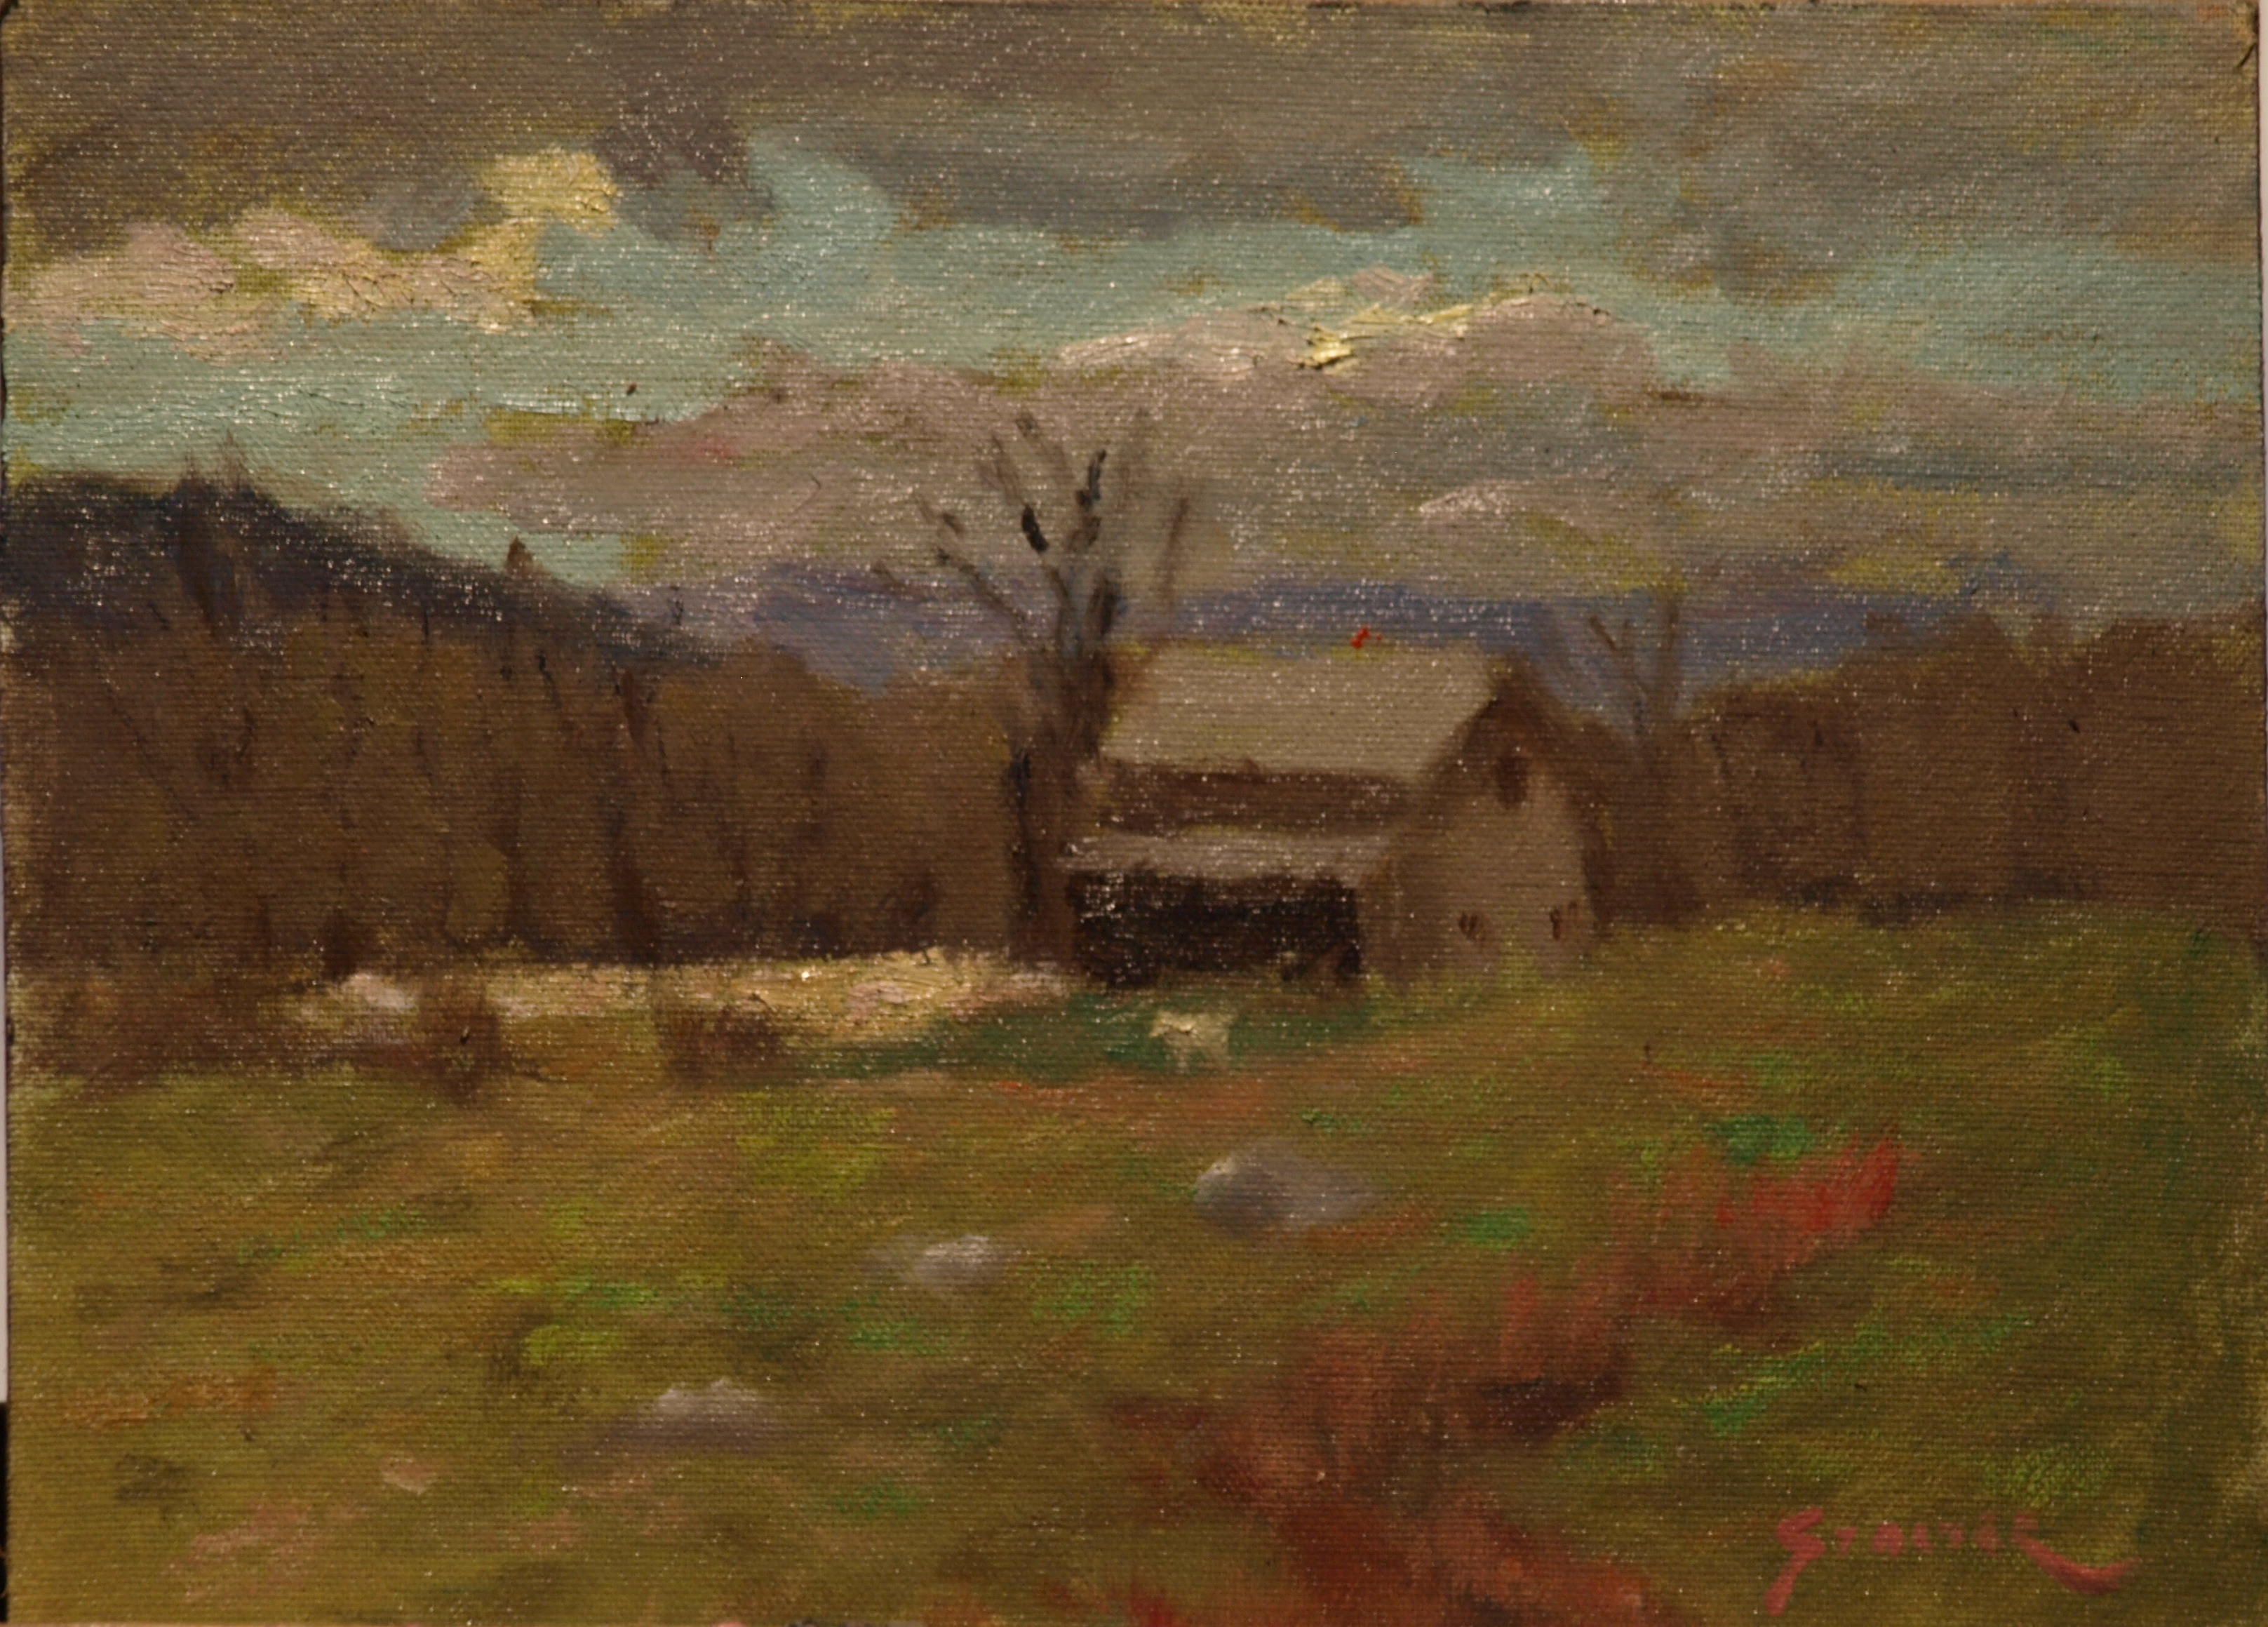 Horse Barn and Pasture, Oil on Canvas on Panel, 9 x 12 Inches, by Richard Stalter, $225